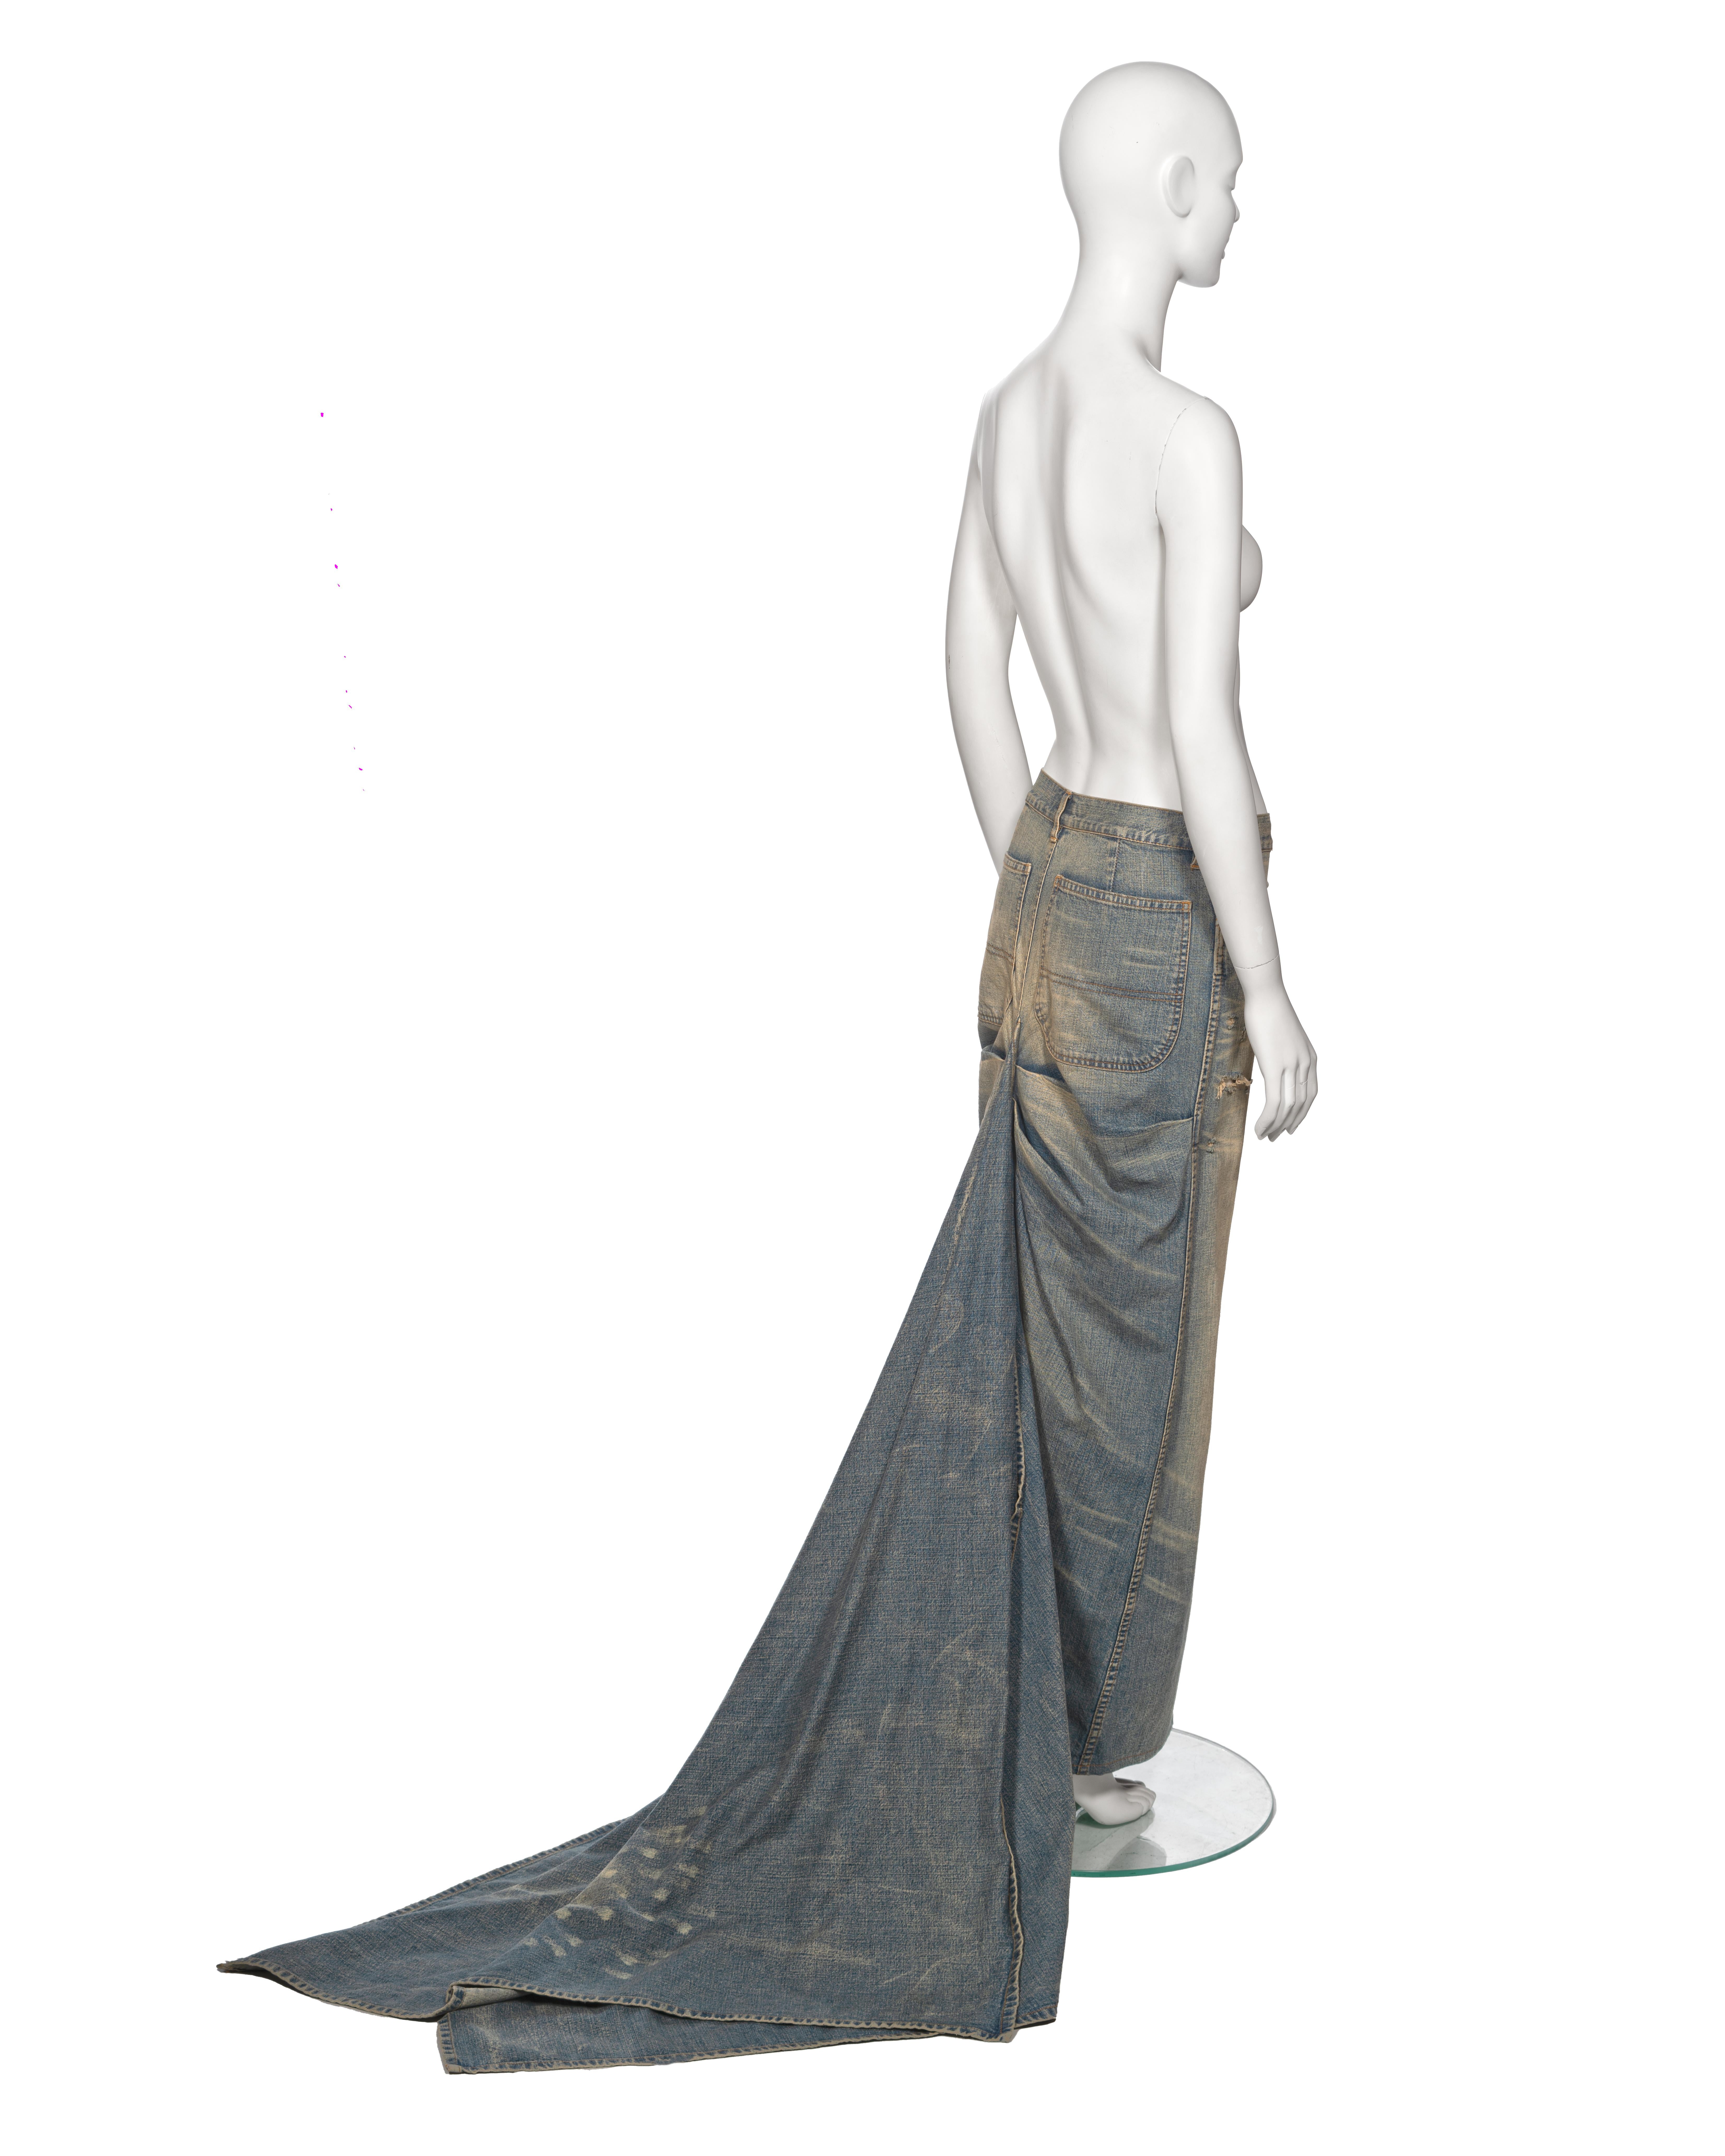 Ralph Lauren Distressed Sand Washed Denim Maxi Skirt with Train, ss 2003 For Sale 3